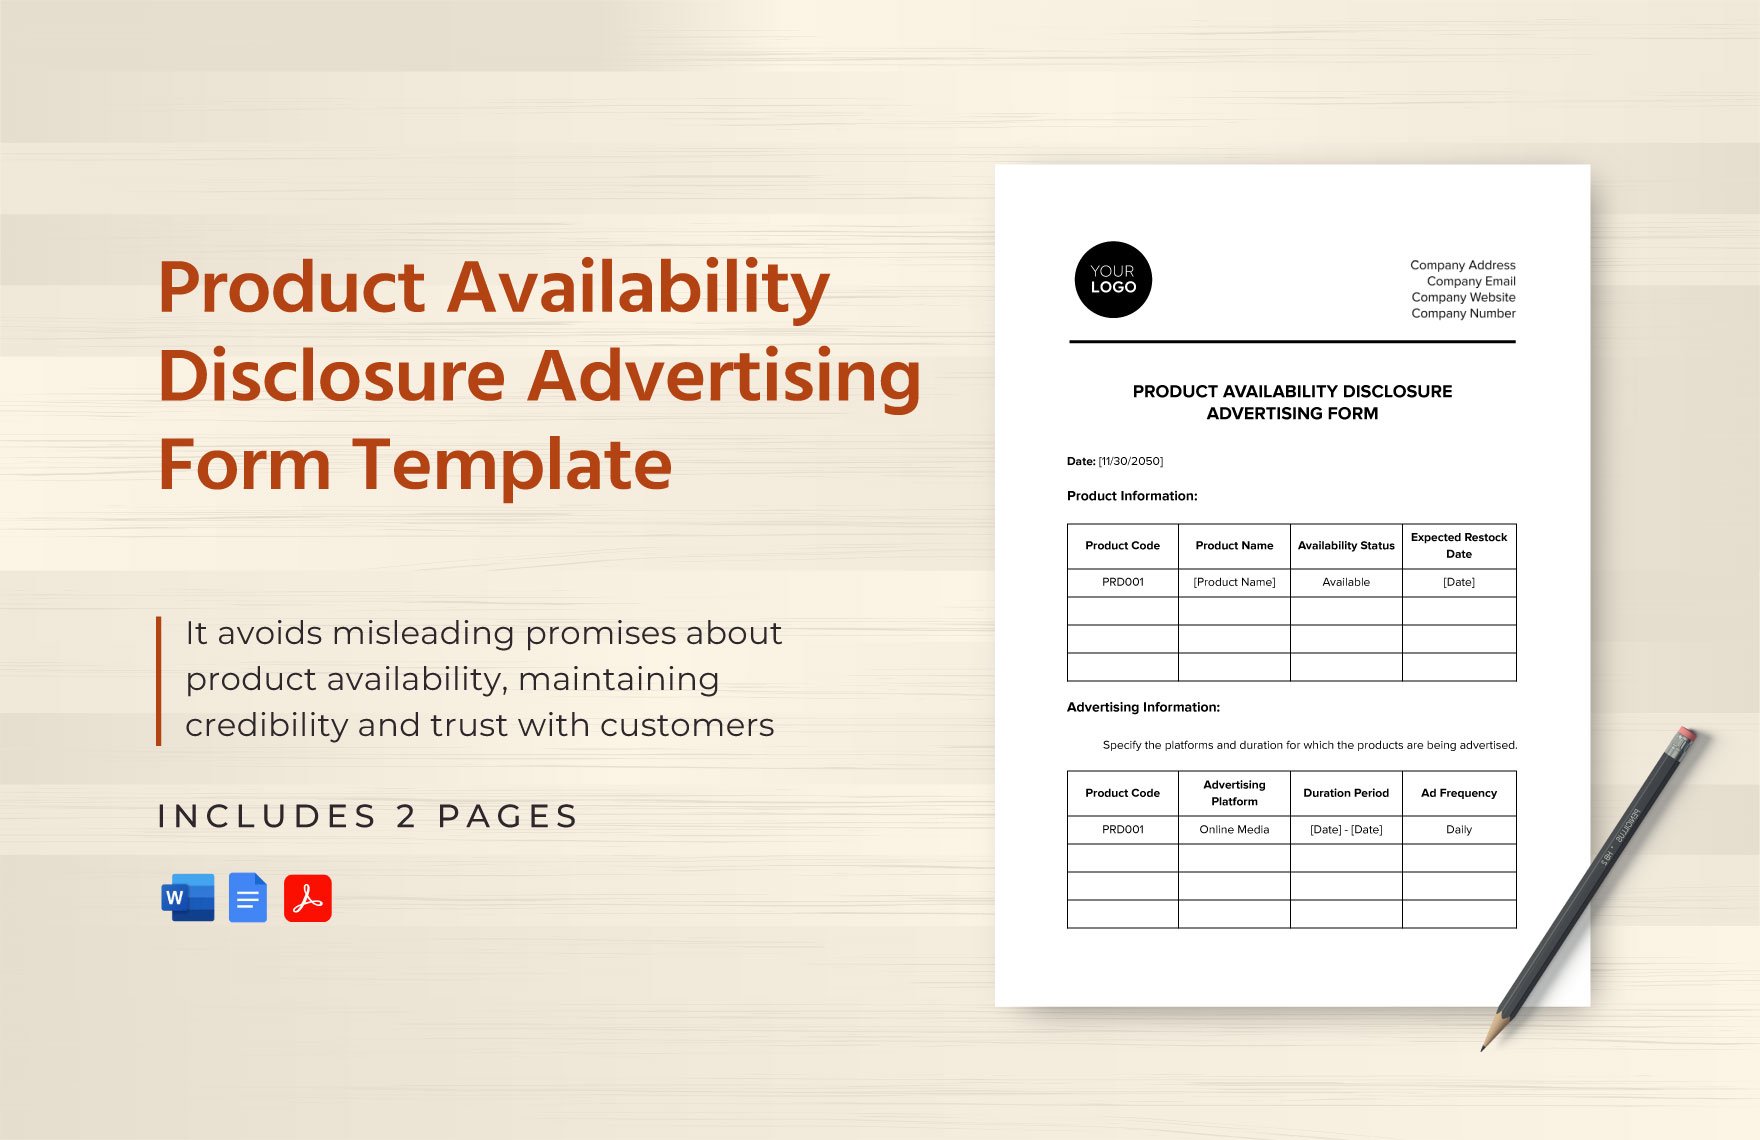 Product Availability Disclosure Advertising Form Template in Word, Google Docs, PDF